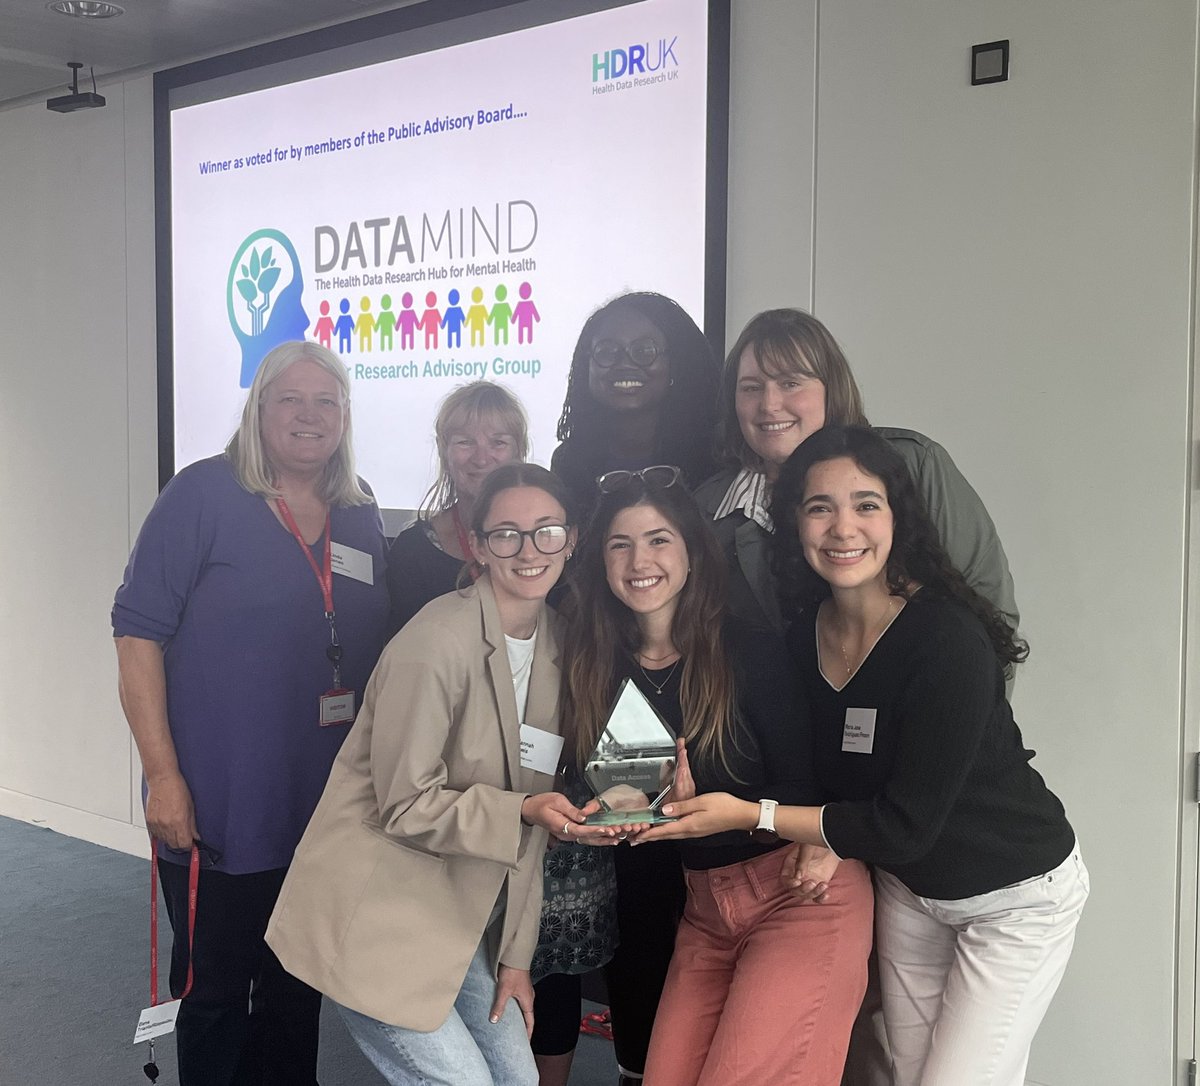 🏆 Congrats to @DatamindUK on receiving the #UKHealthDataResearchAlliance Transparency in Data Access Award! They were supported to adopt Transparency Standards to improve #TransparentDataAccess, developing accessible materials such as a glossary, infographics and lay summaries.